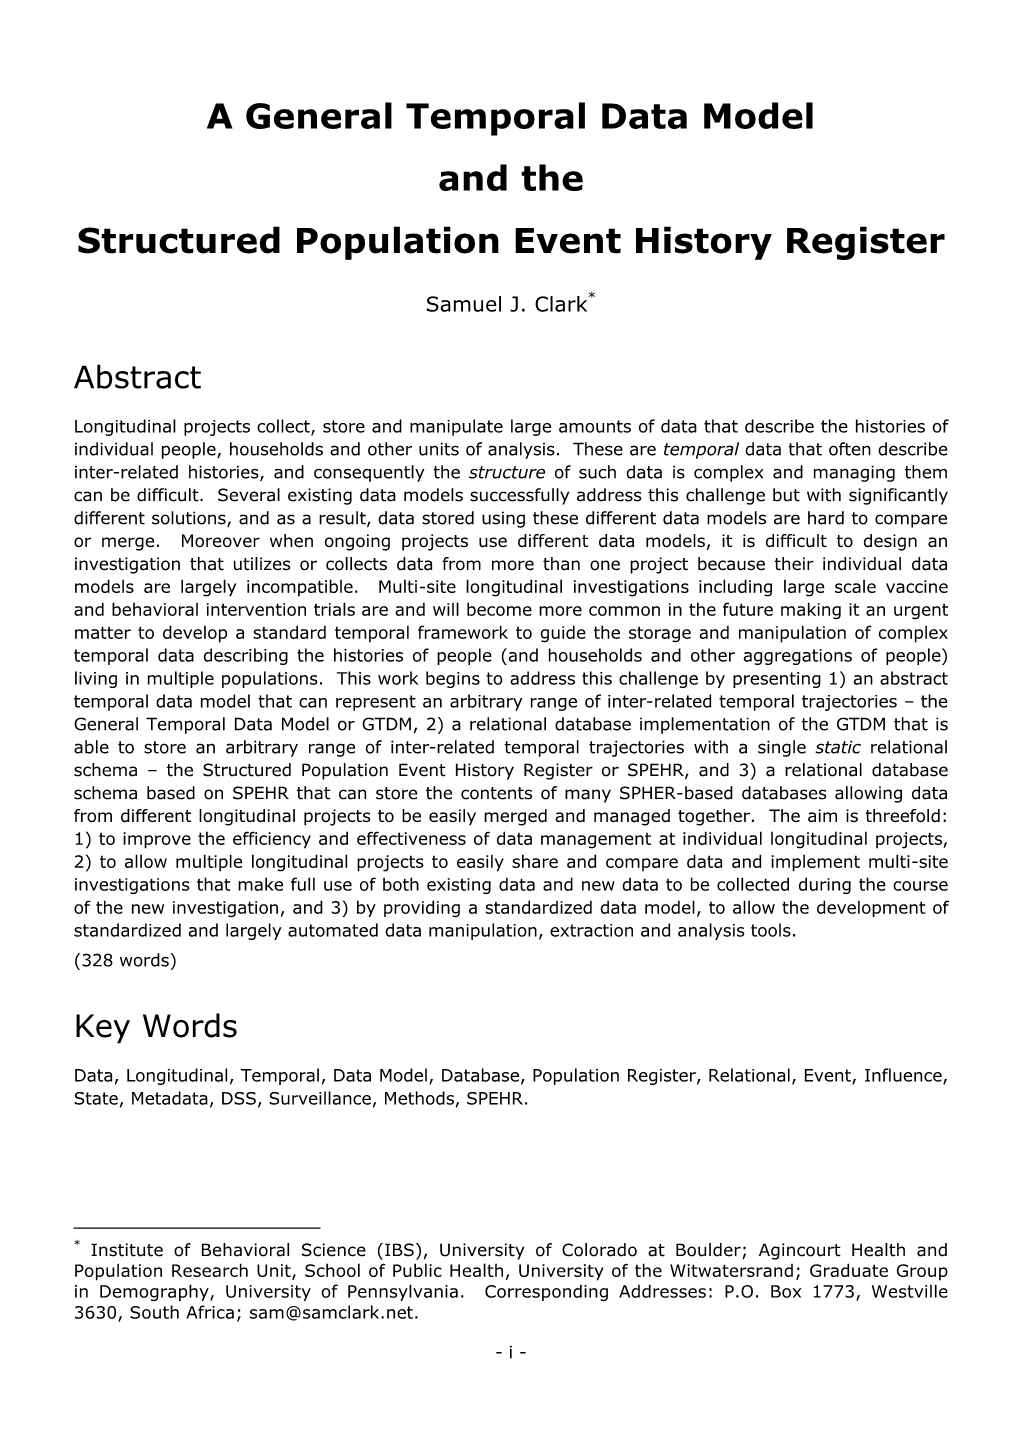 A General Temporal Data Model and the Structured Population Event History Register